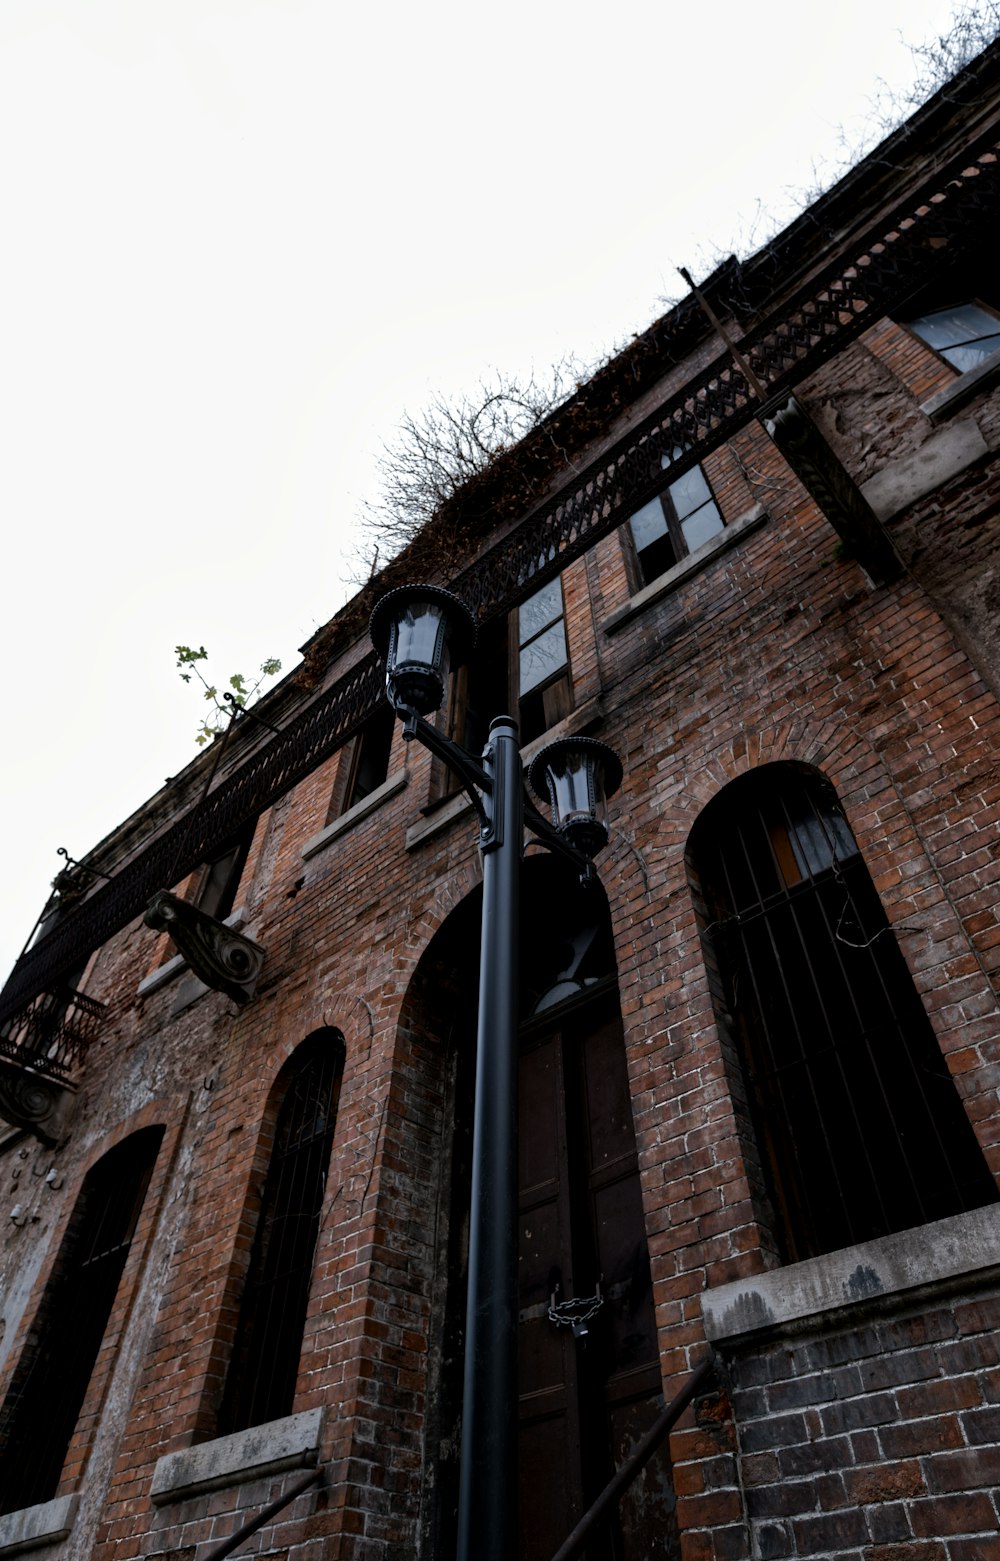 a street light in front of a brick building